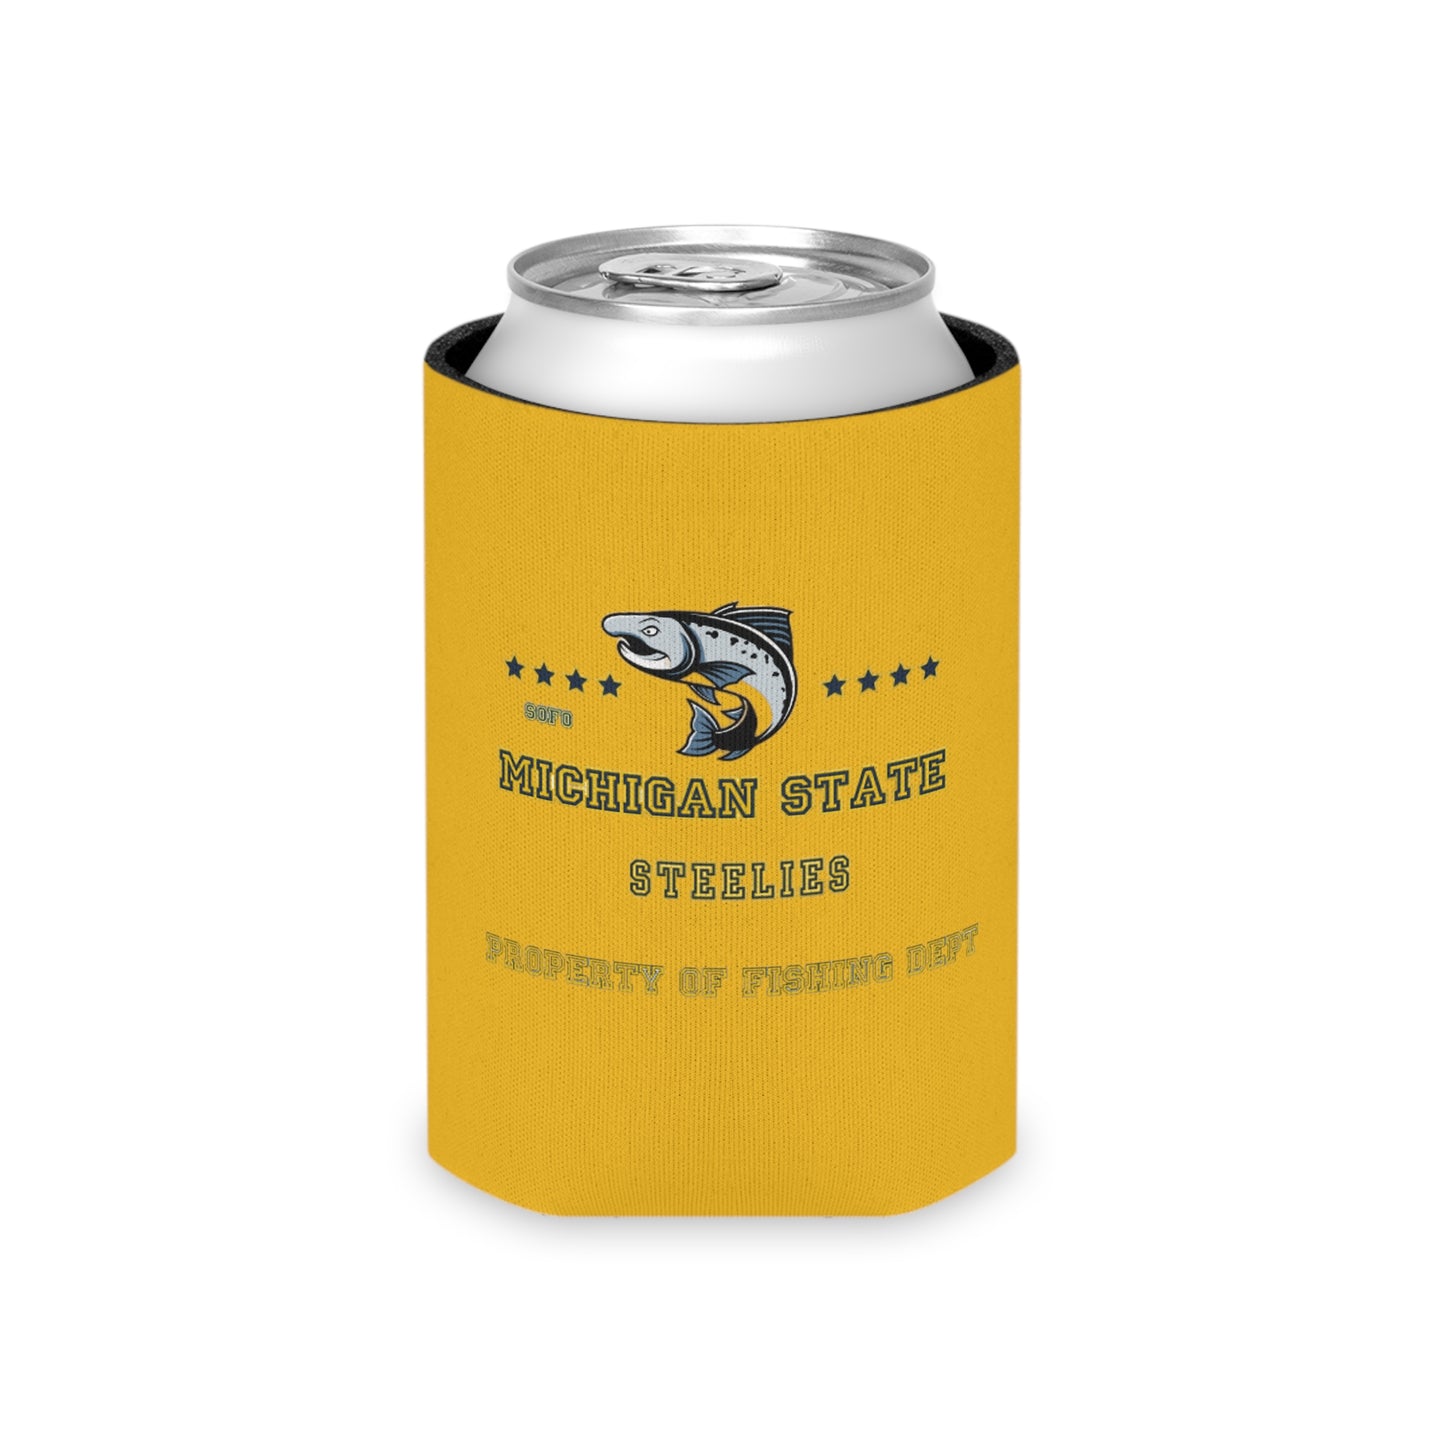 Michigans State Steelies Property Can Cooler